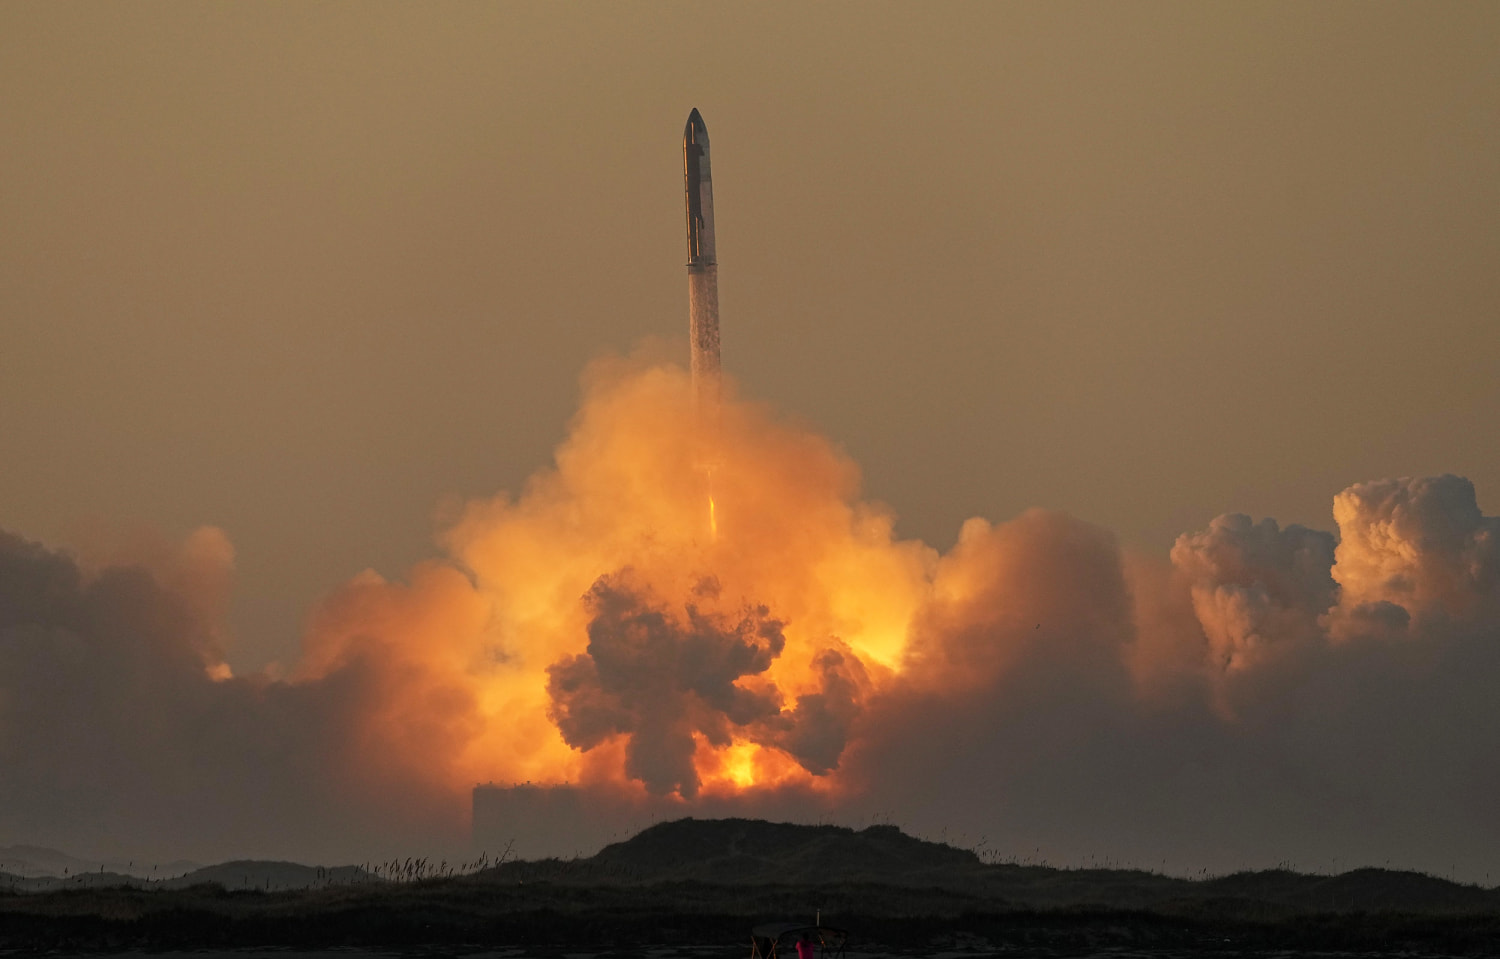 SpaceX’s Starship achieves liftoff and separation, but ‘mishap’ results in loss of rocket